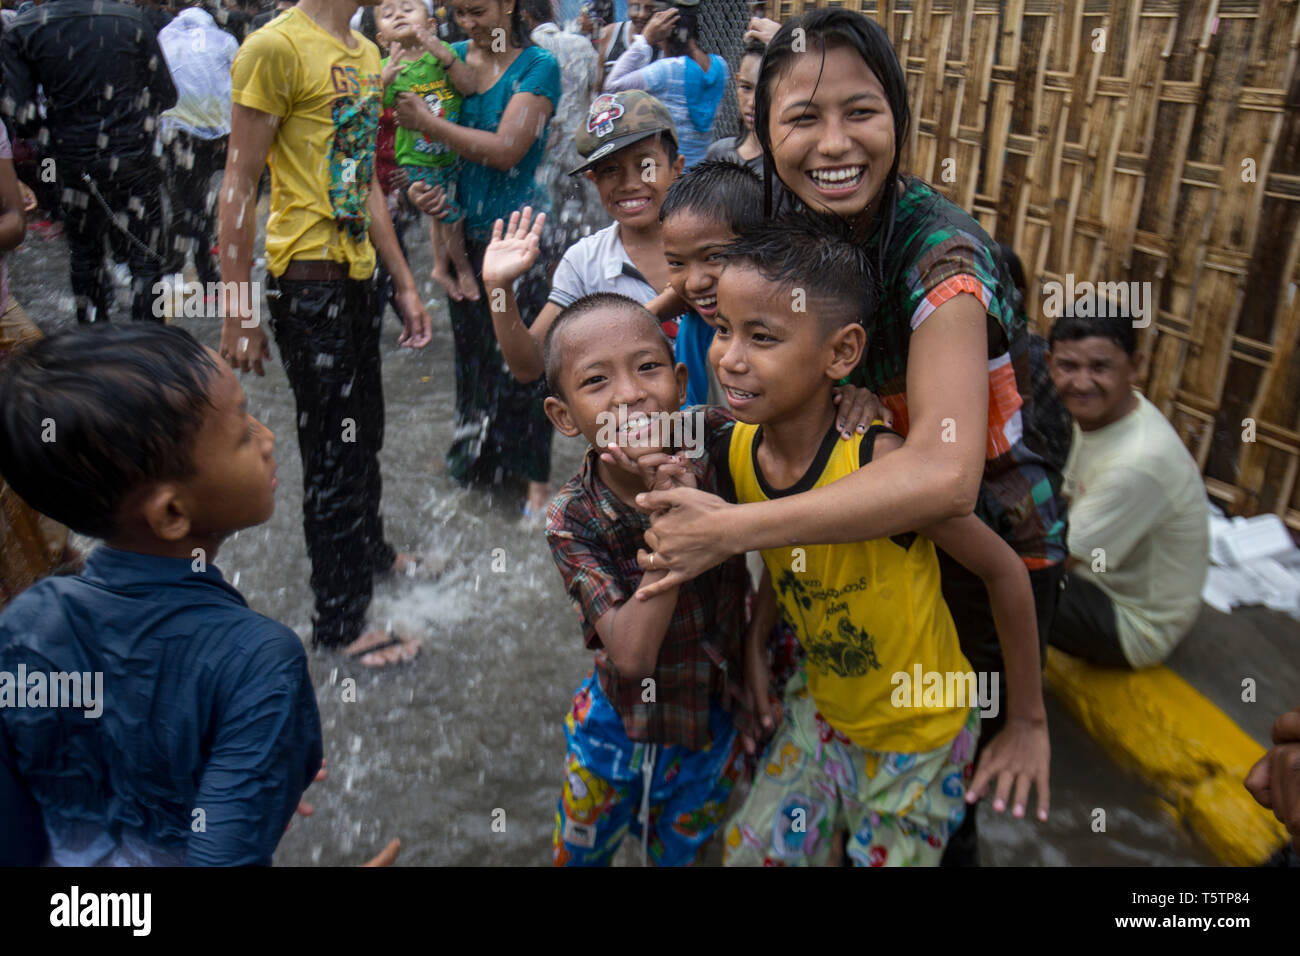 People getting wet and having fun during the Thingyan Burmese New Year Festival in Mandalay, Myanmar. Stock Photo